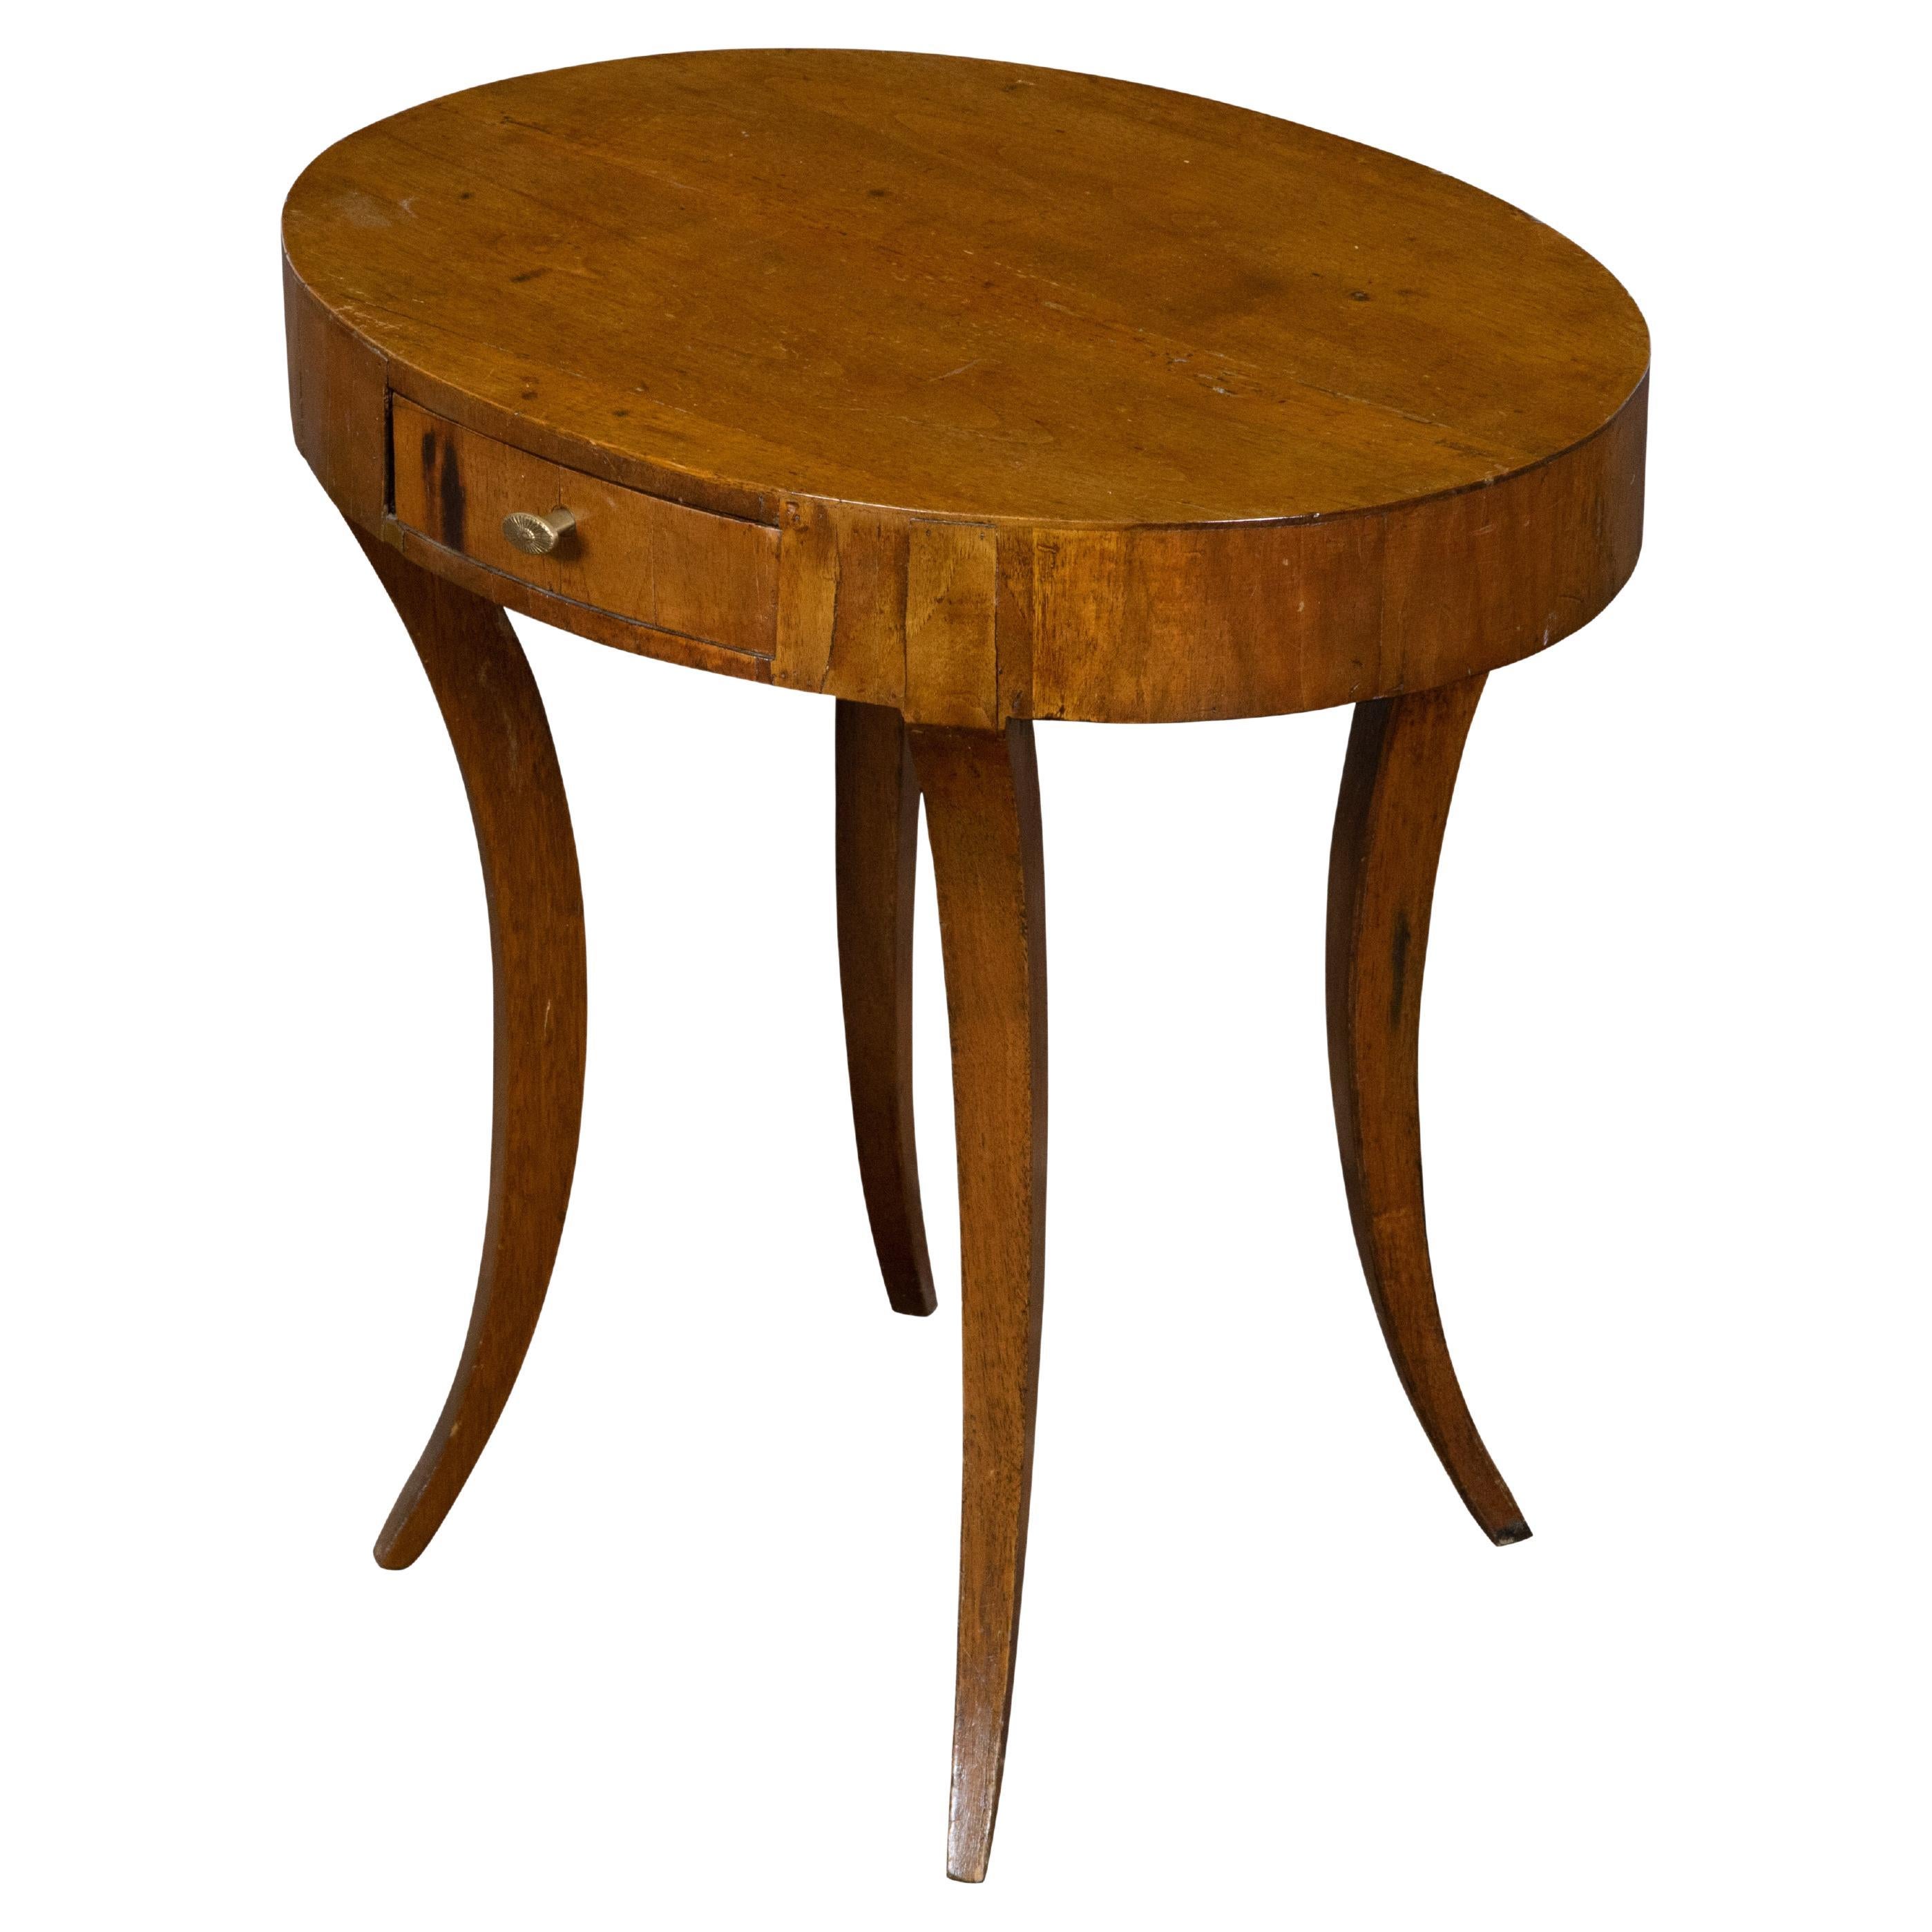 Italian 1810s Neoclassical Walnut Table with Oval Top, Drawer and Saber Legs For Sale